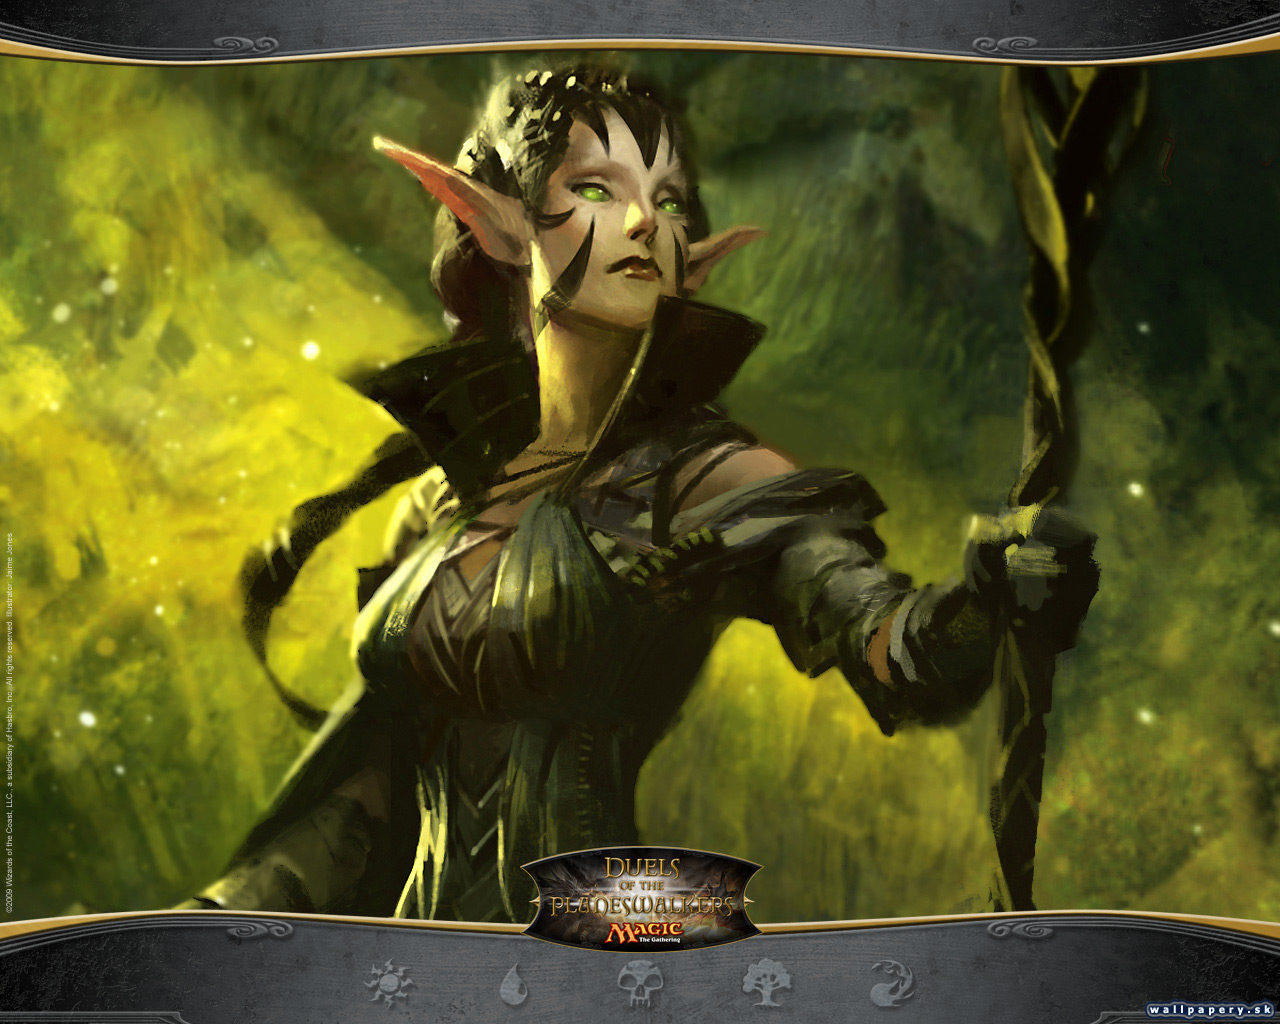 Magic: The Gathering - Duels of the Planeswalkers - wallpaper 1